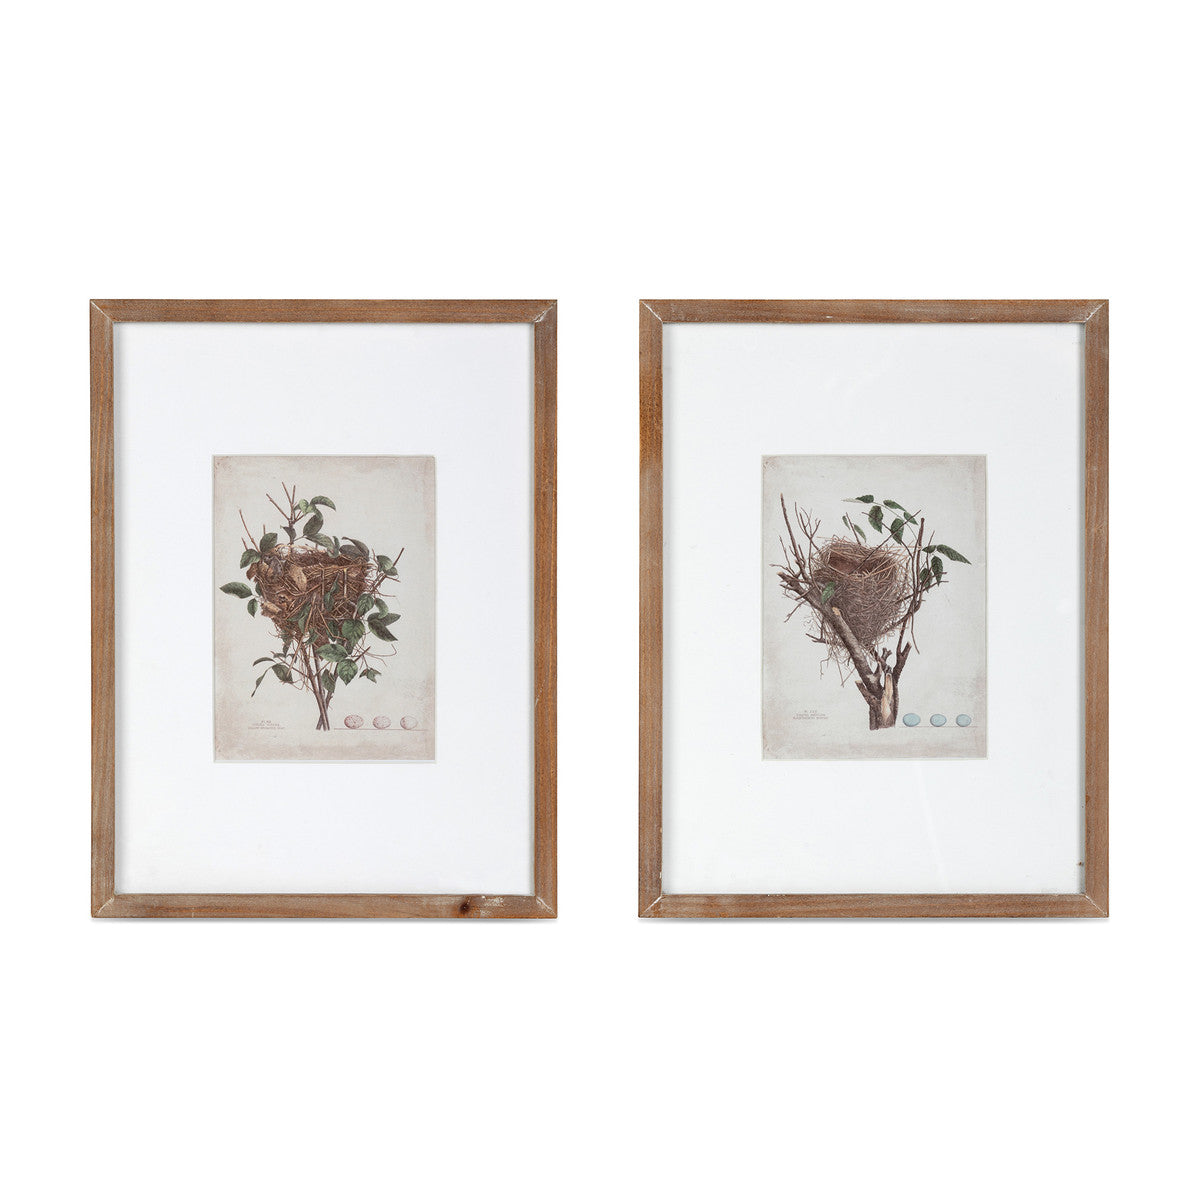 Set of 2 Framed Feathered Nest Prints Wall Decor